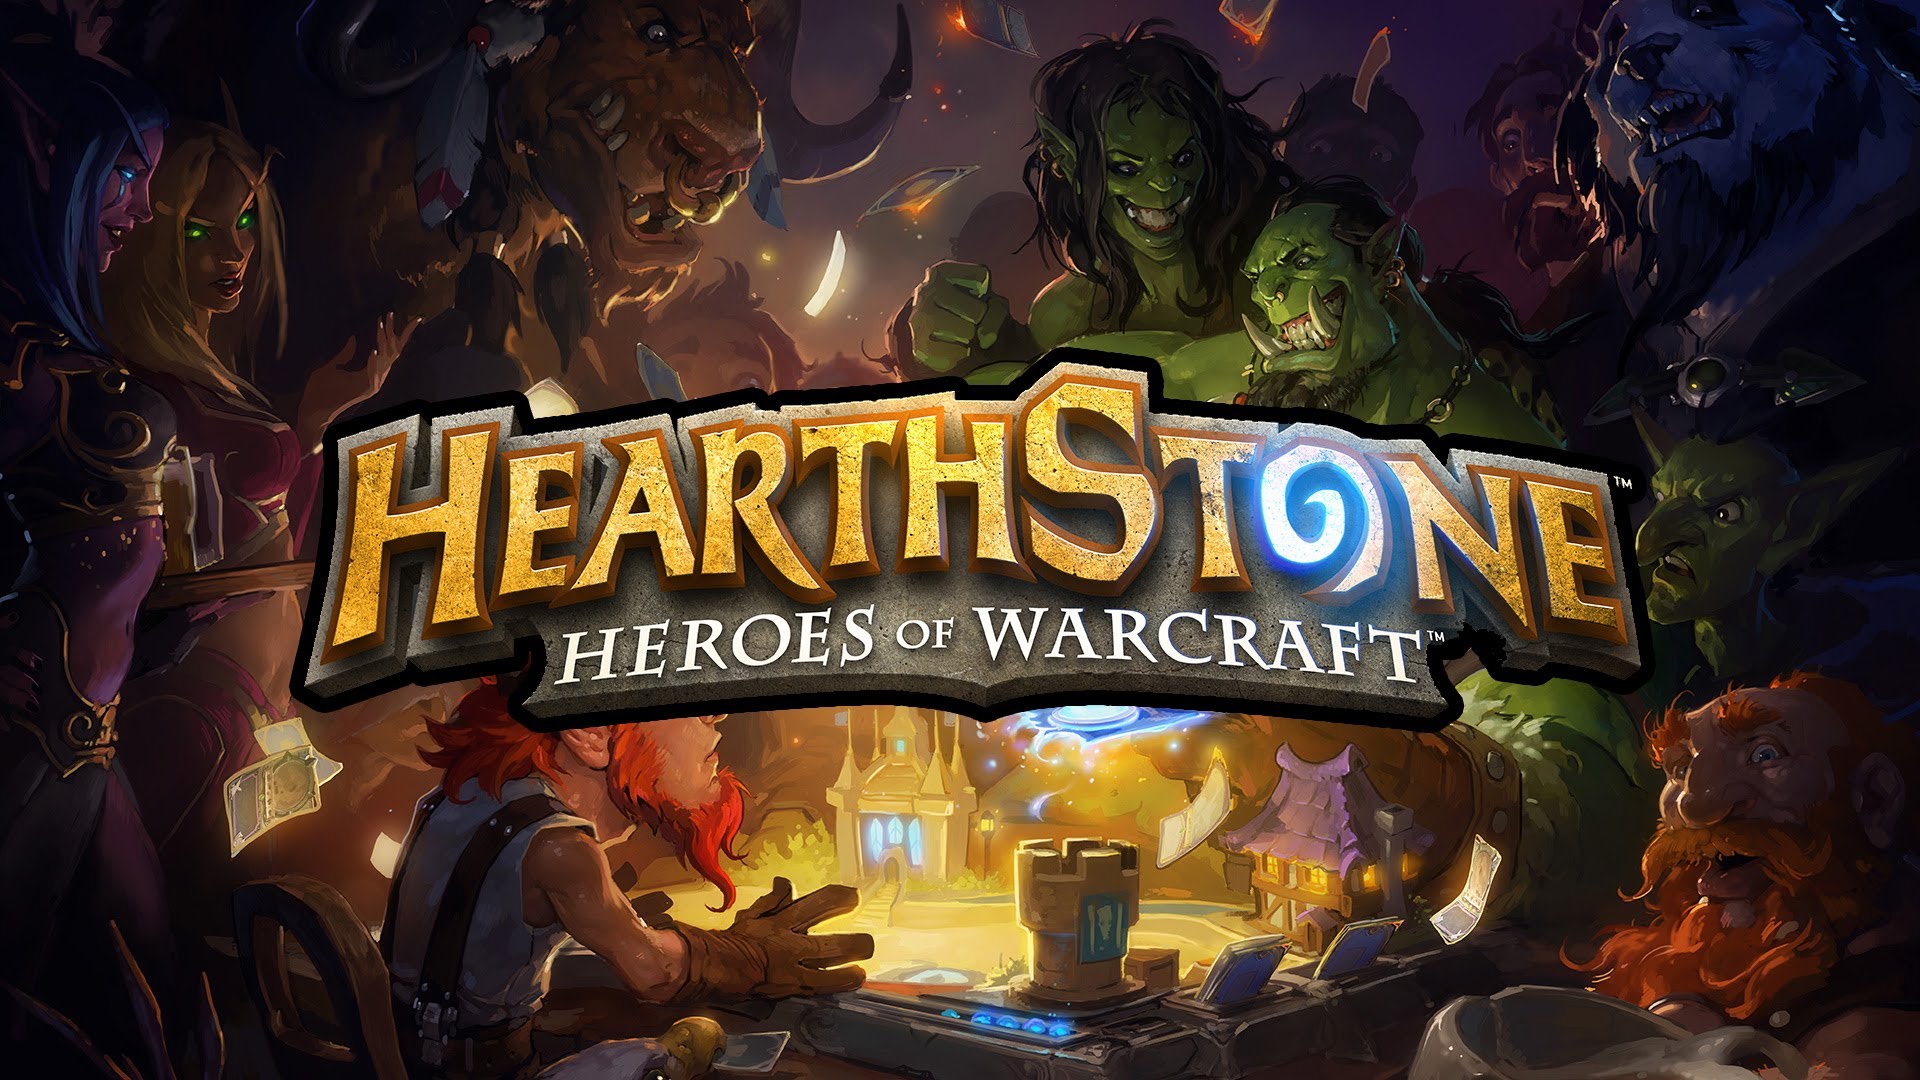 Next Hearthstone set revealed, all players get three free packs and a Legendary